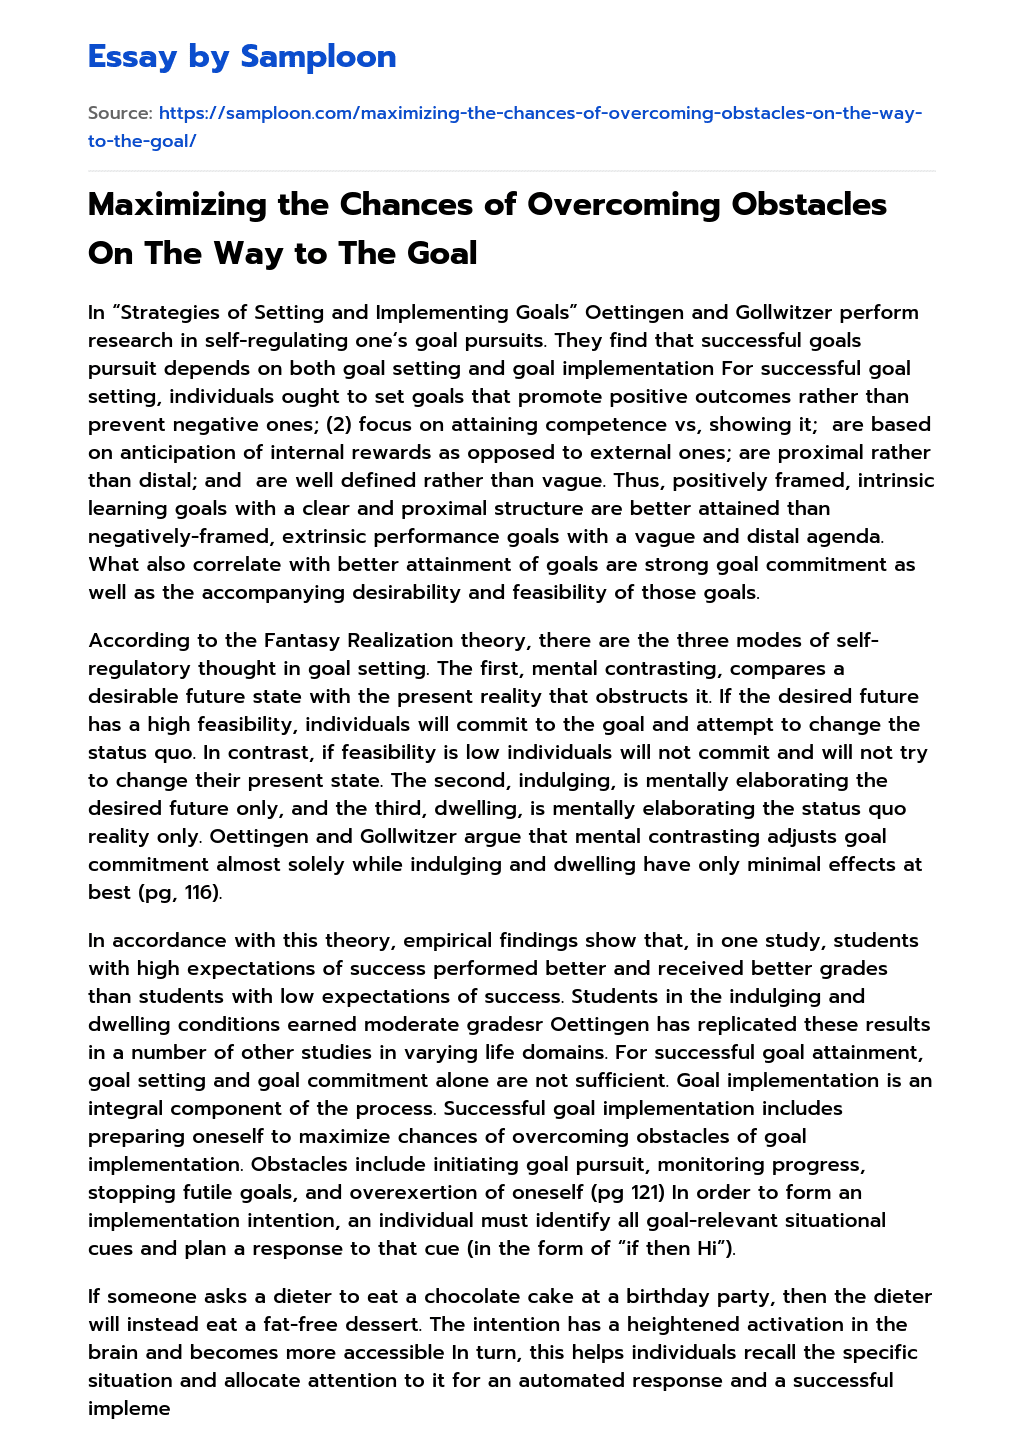 Maximizing the Chances of Overcoming Obstacles On The Way to The Goal essay